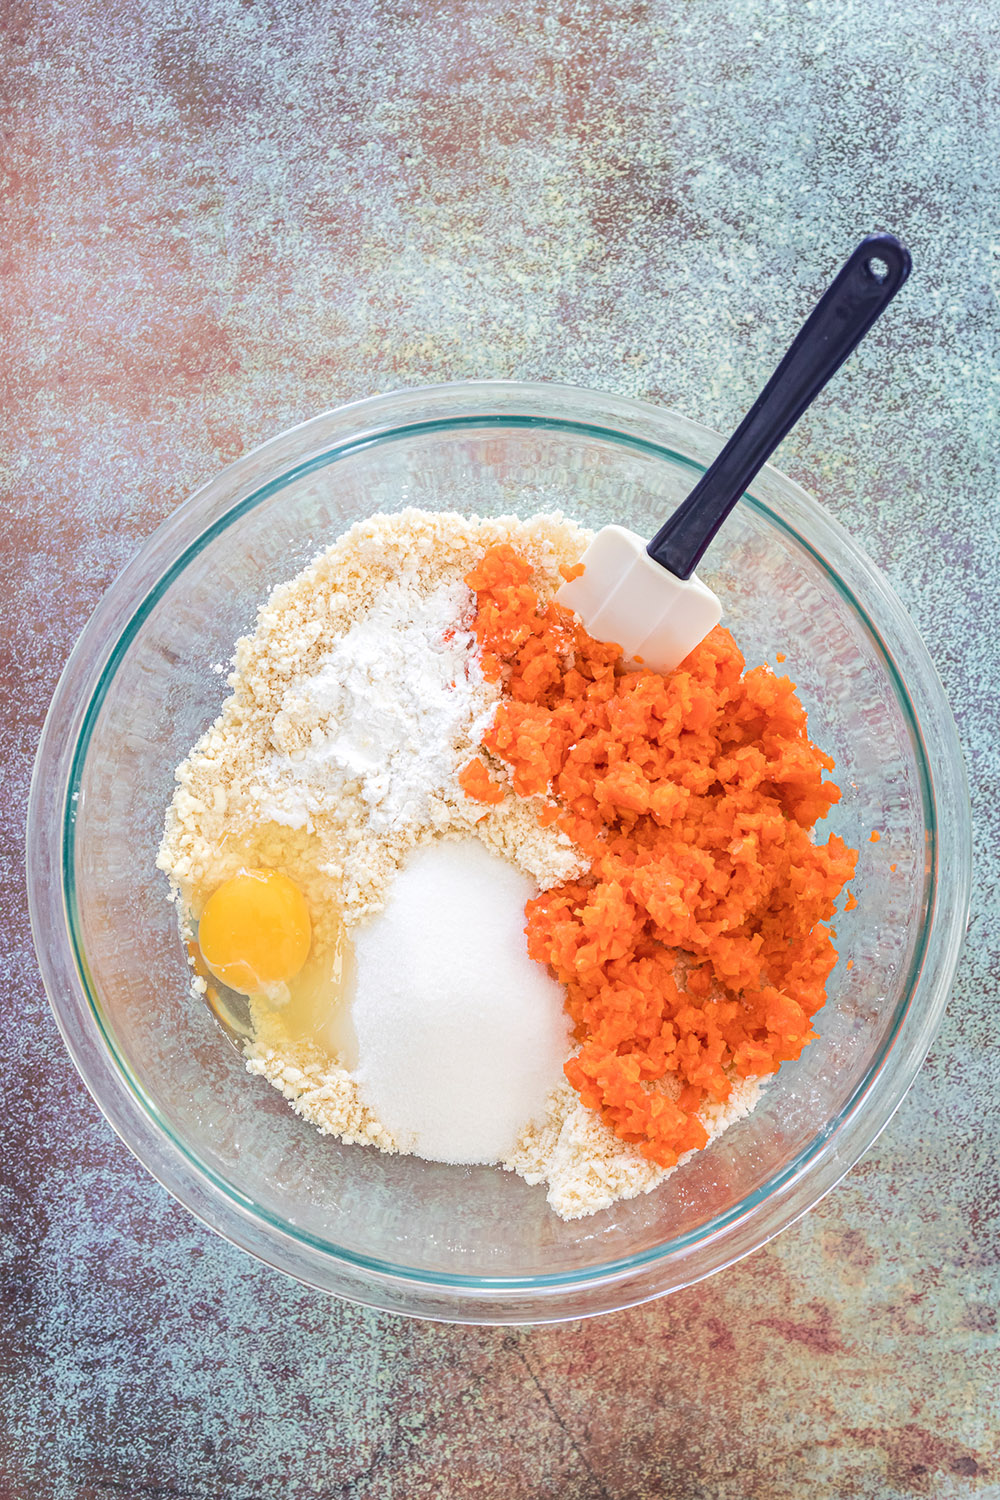 Carrots, flour, butter, and egg in a mixing bowl.